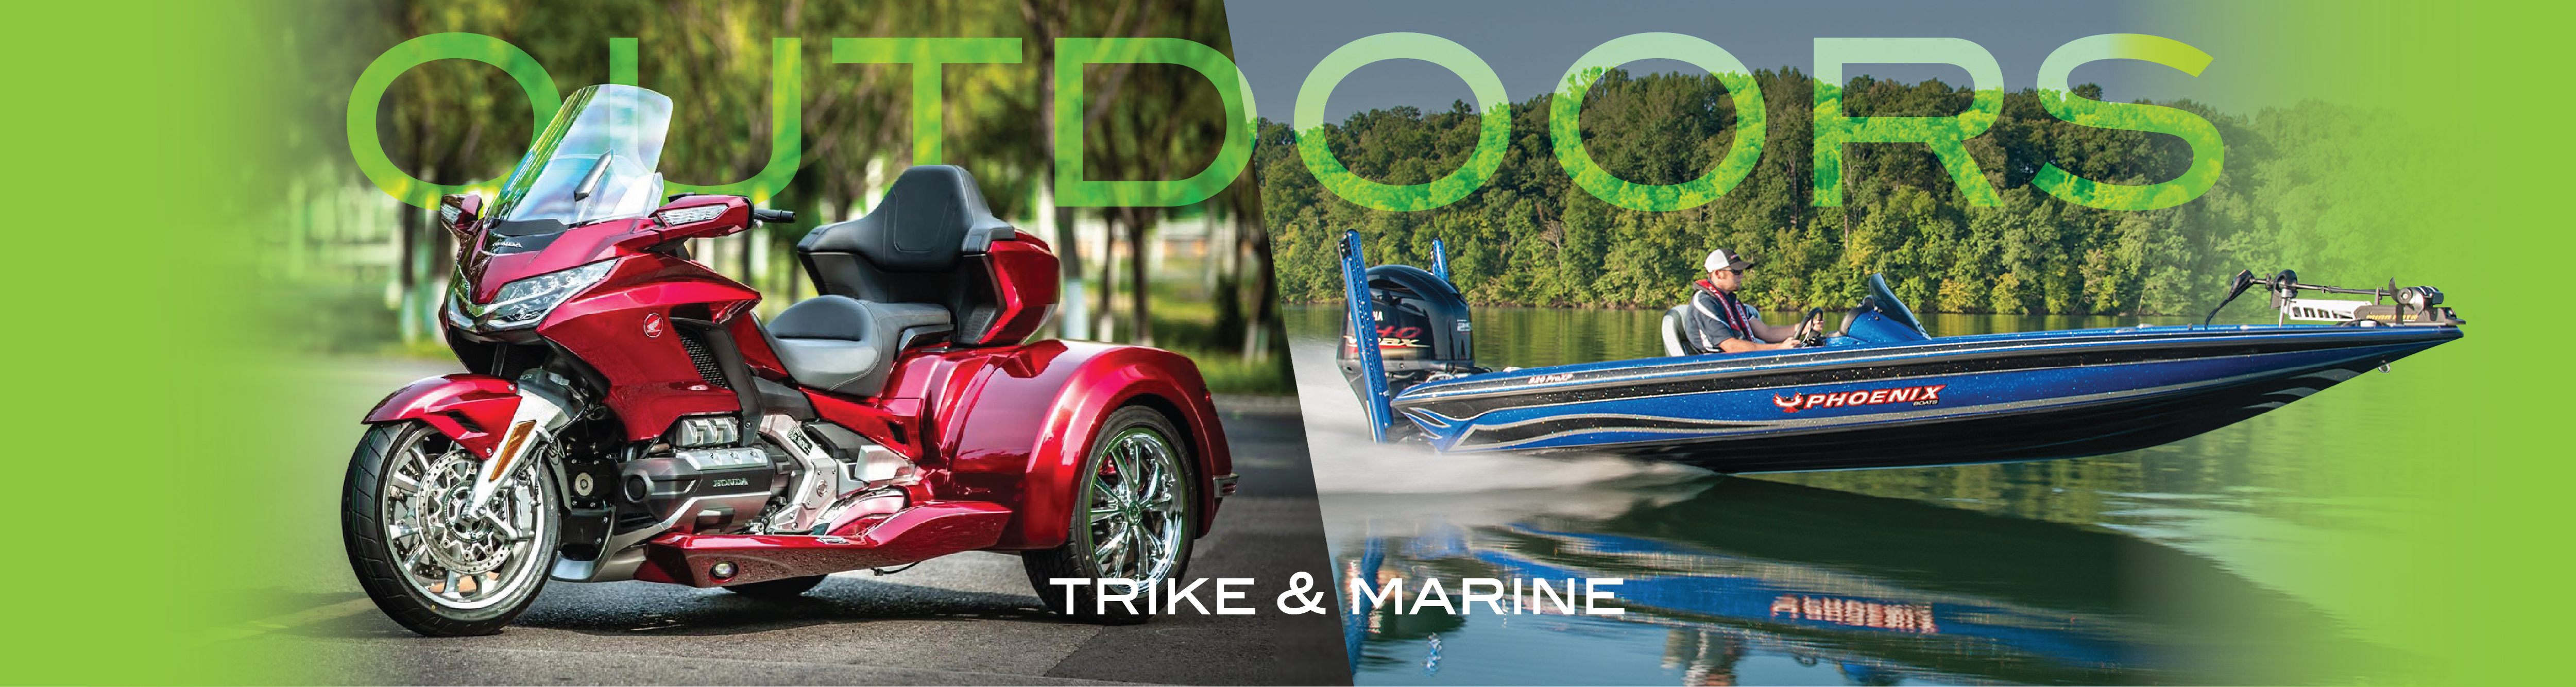 Outdoors. Trike & Marine. Split image featuring both a Honda Goldwing Trike with California Side Car Trike Kit and a Phoenix Bass Boat.